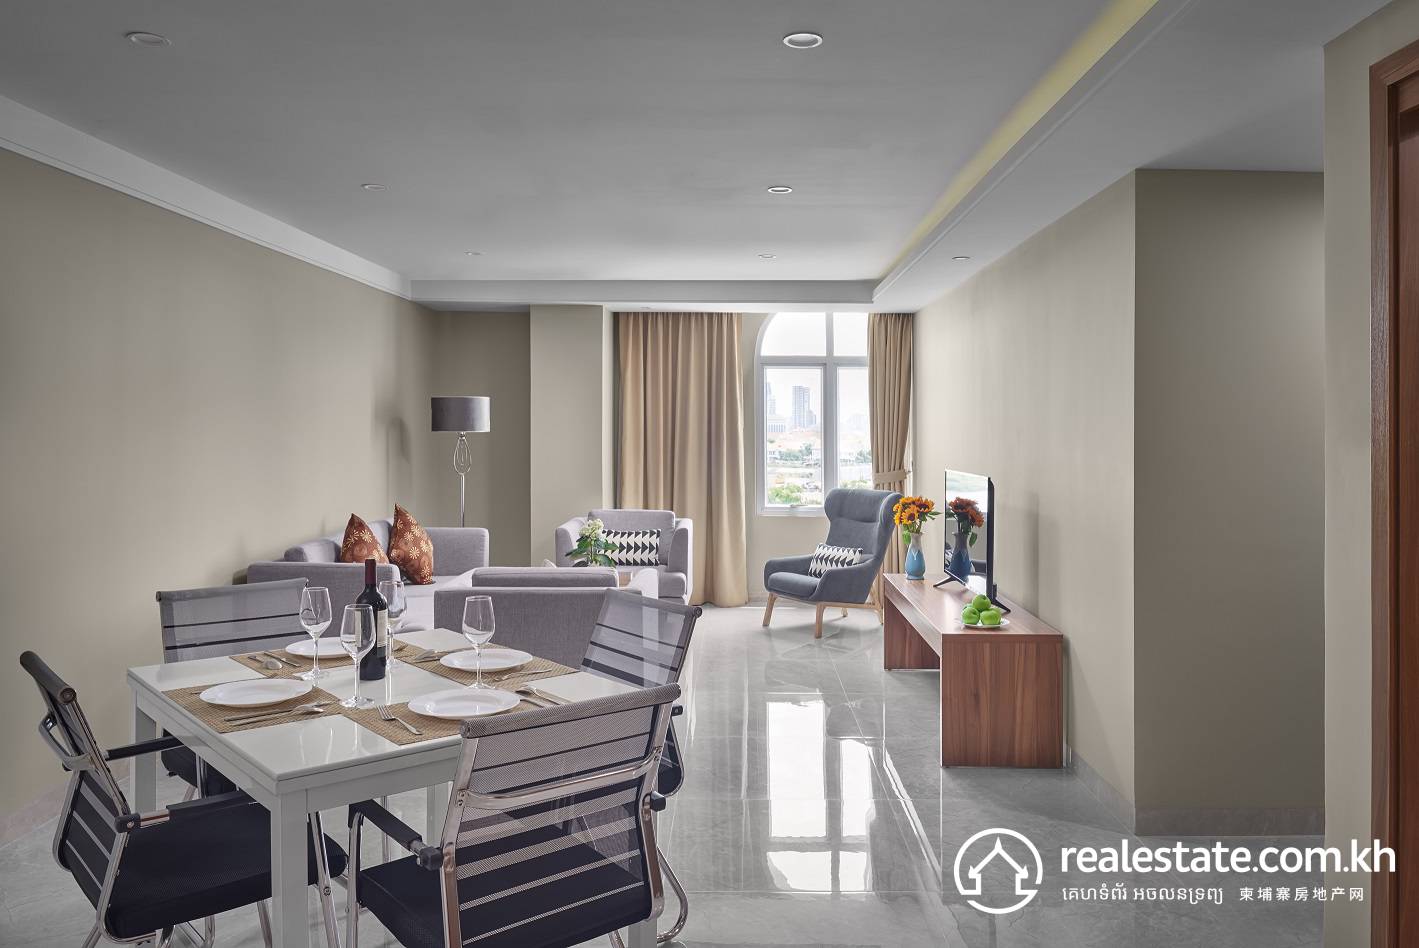 Best serviced apartments for long-term stays in Phnom Penh